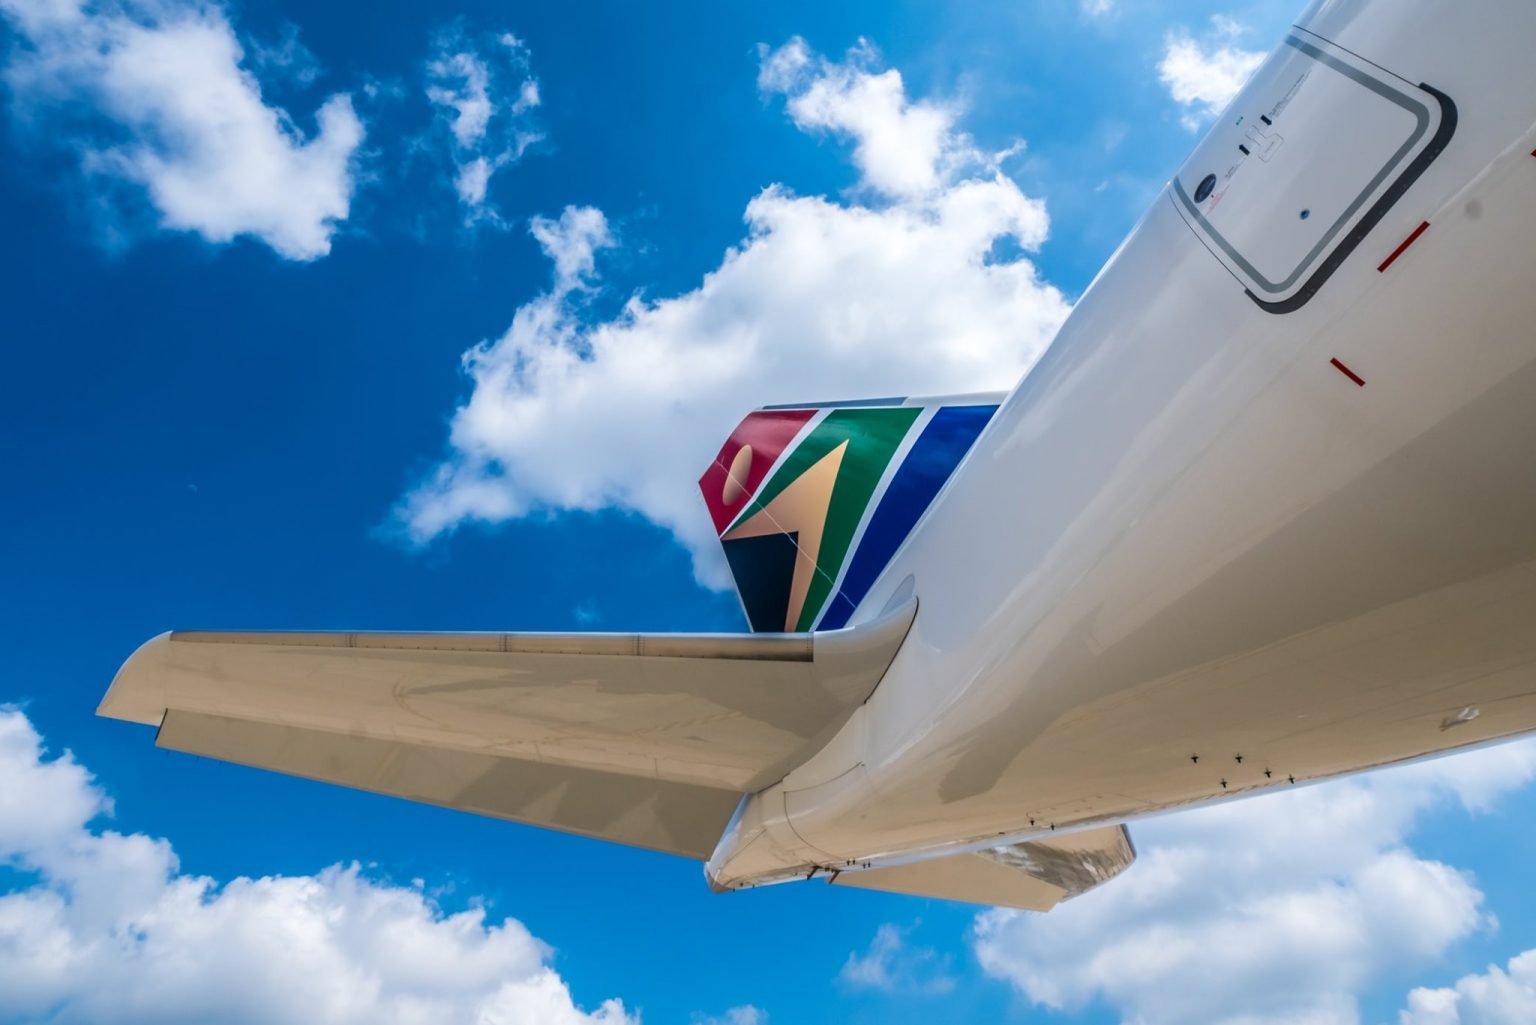 SAA Announces Several Repatriation Flights to and From South Africa in